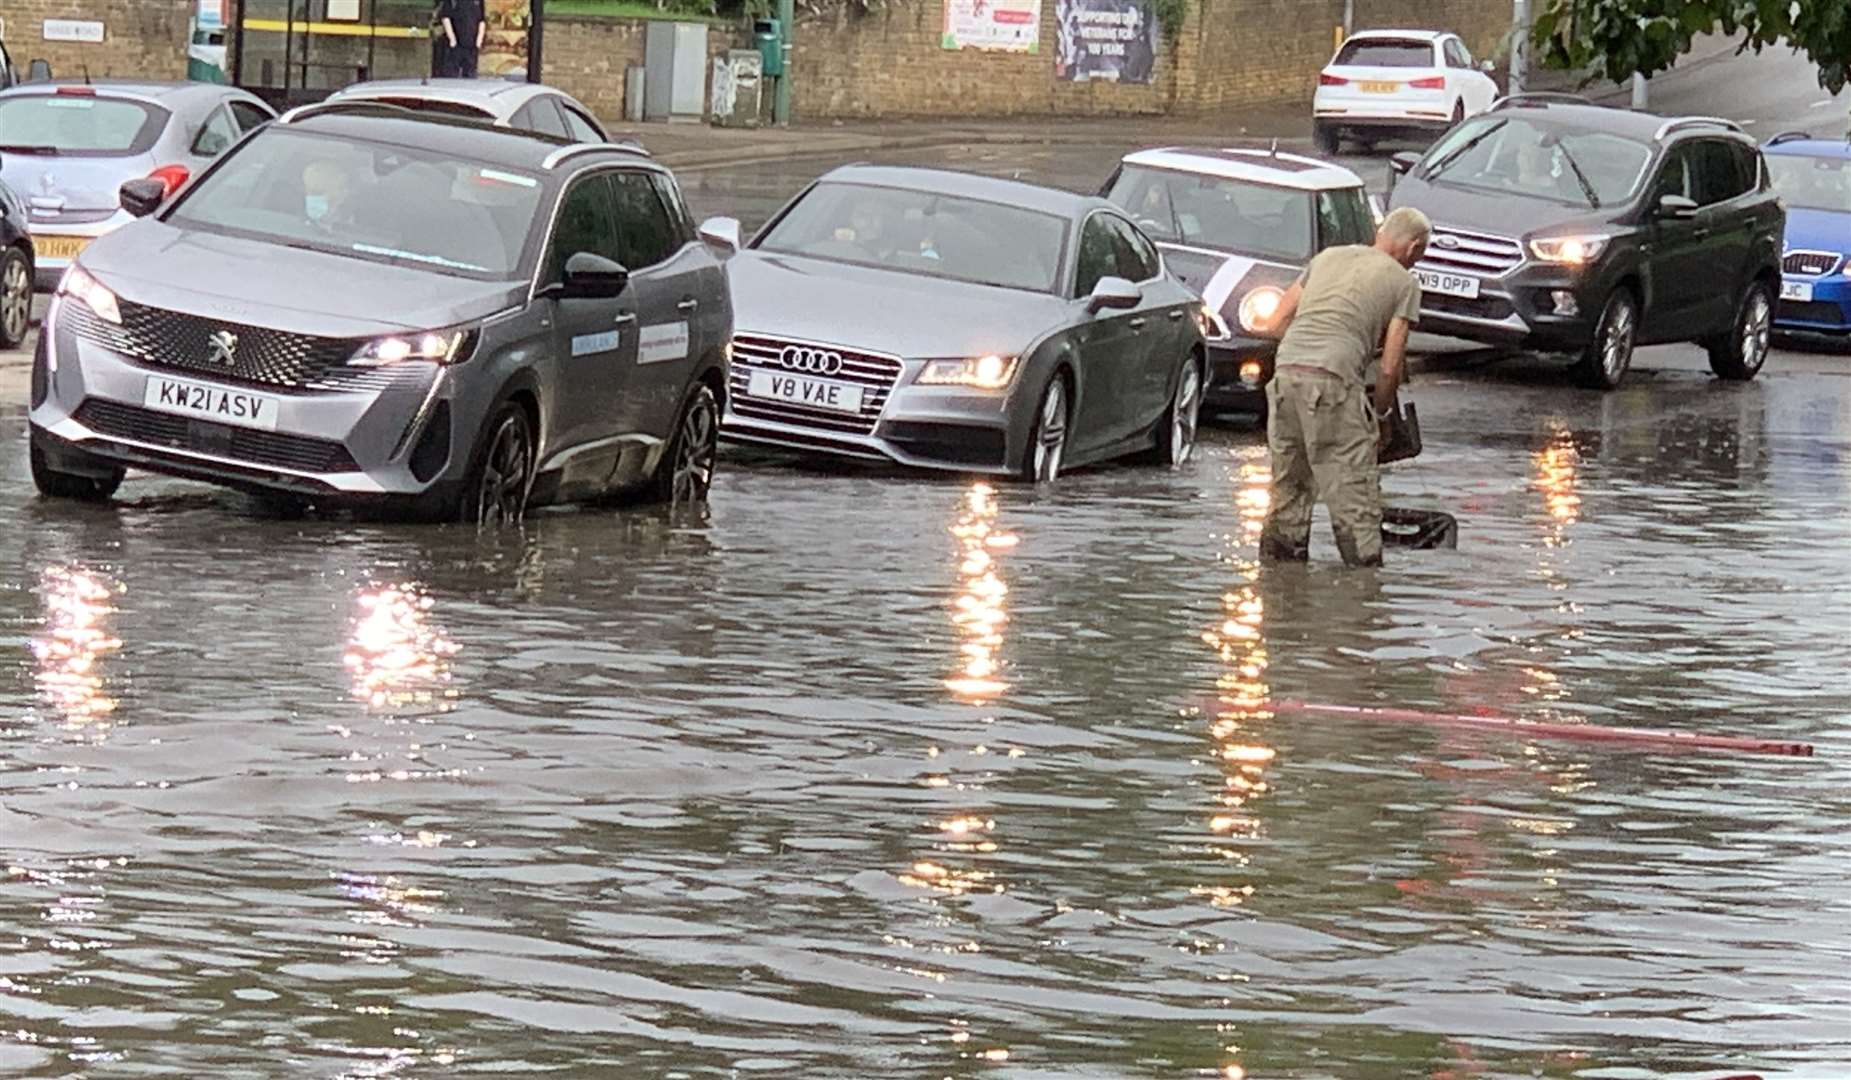 Flooding on the A20 at the Quarry Wood lights on Tuesday, July 20. Picture: Conrad Fry